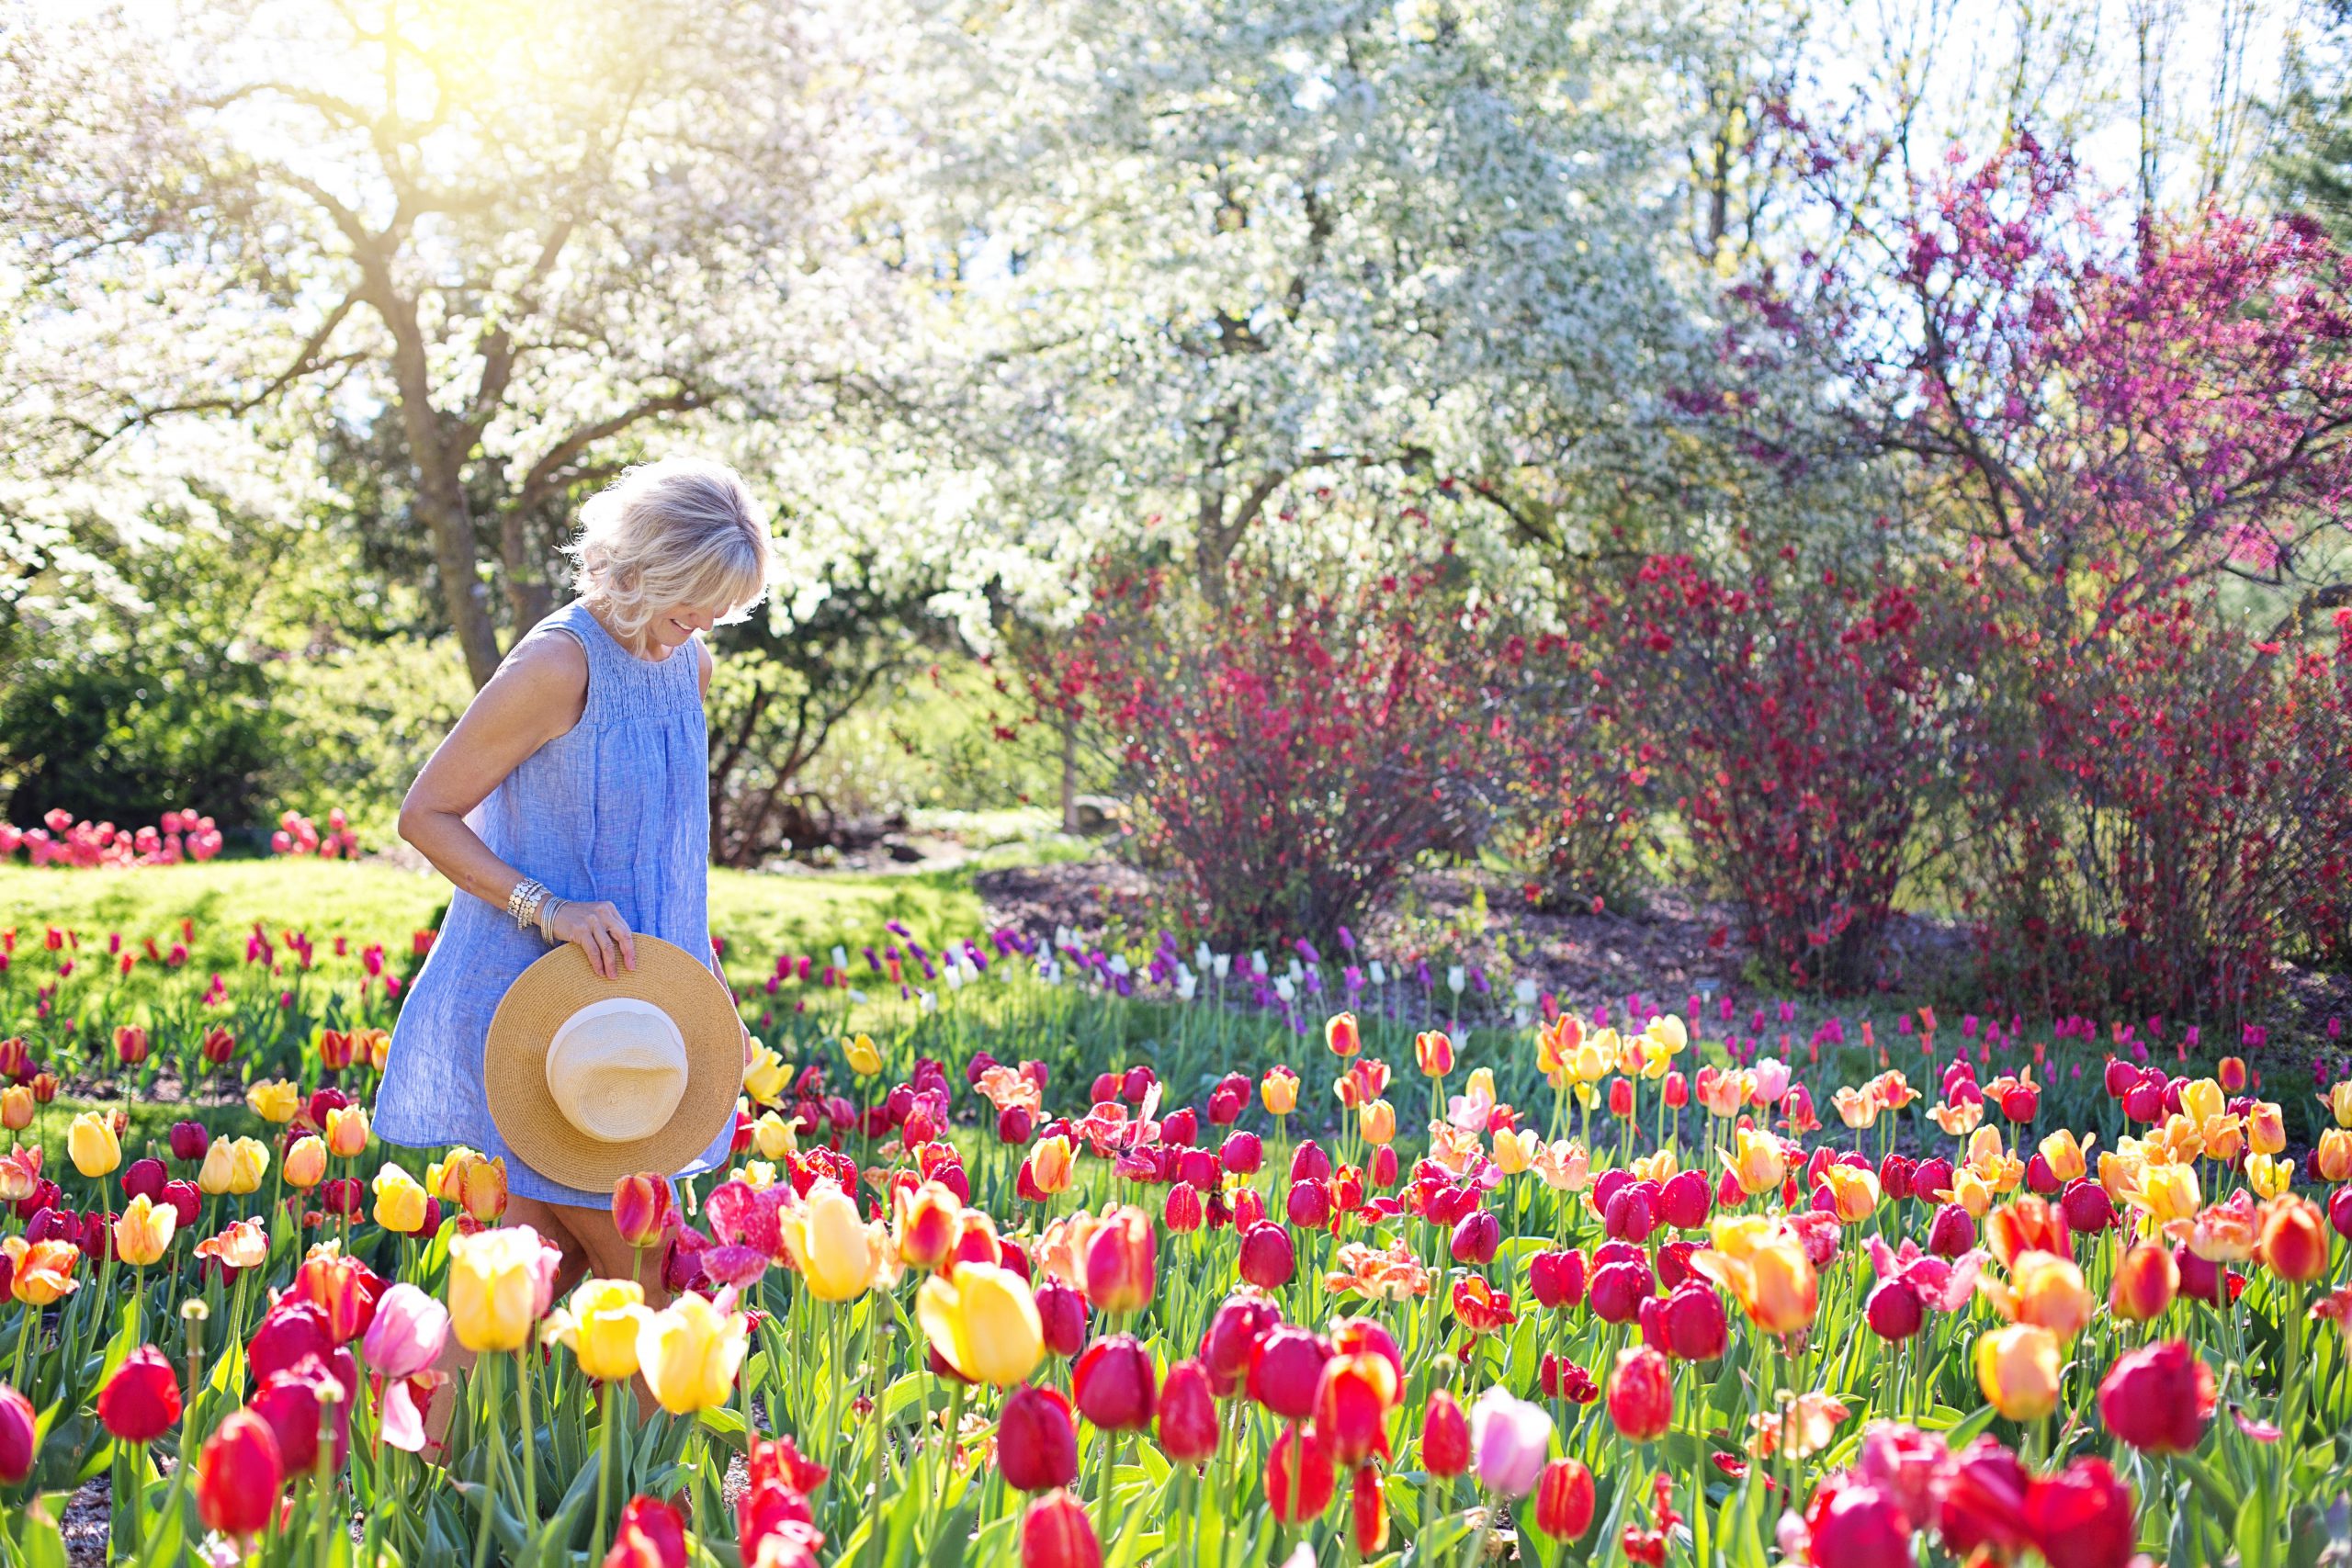 women standing in flowers - How to Ditch Old Habits and Adopt Better Ones